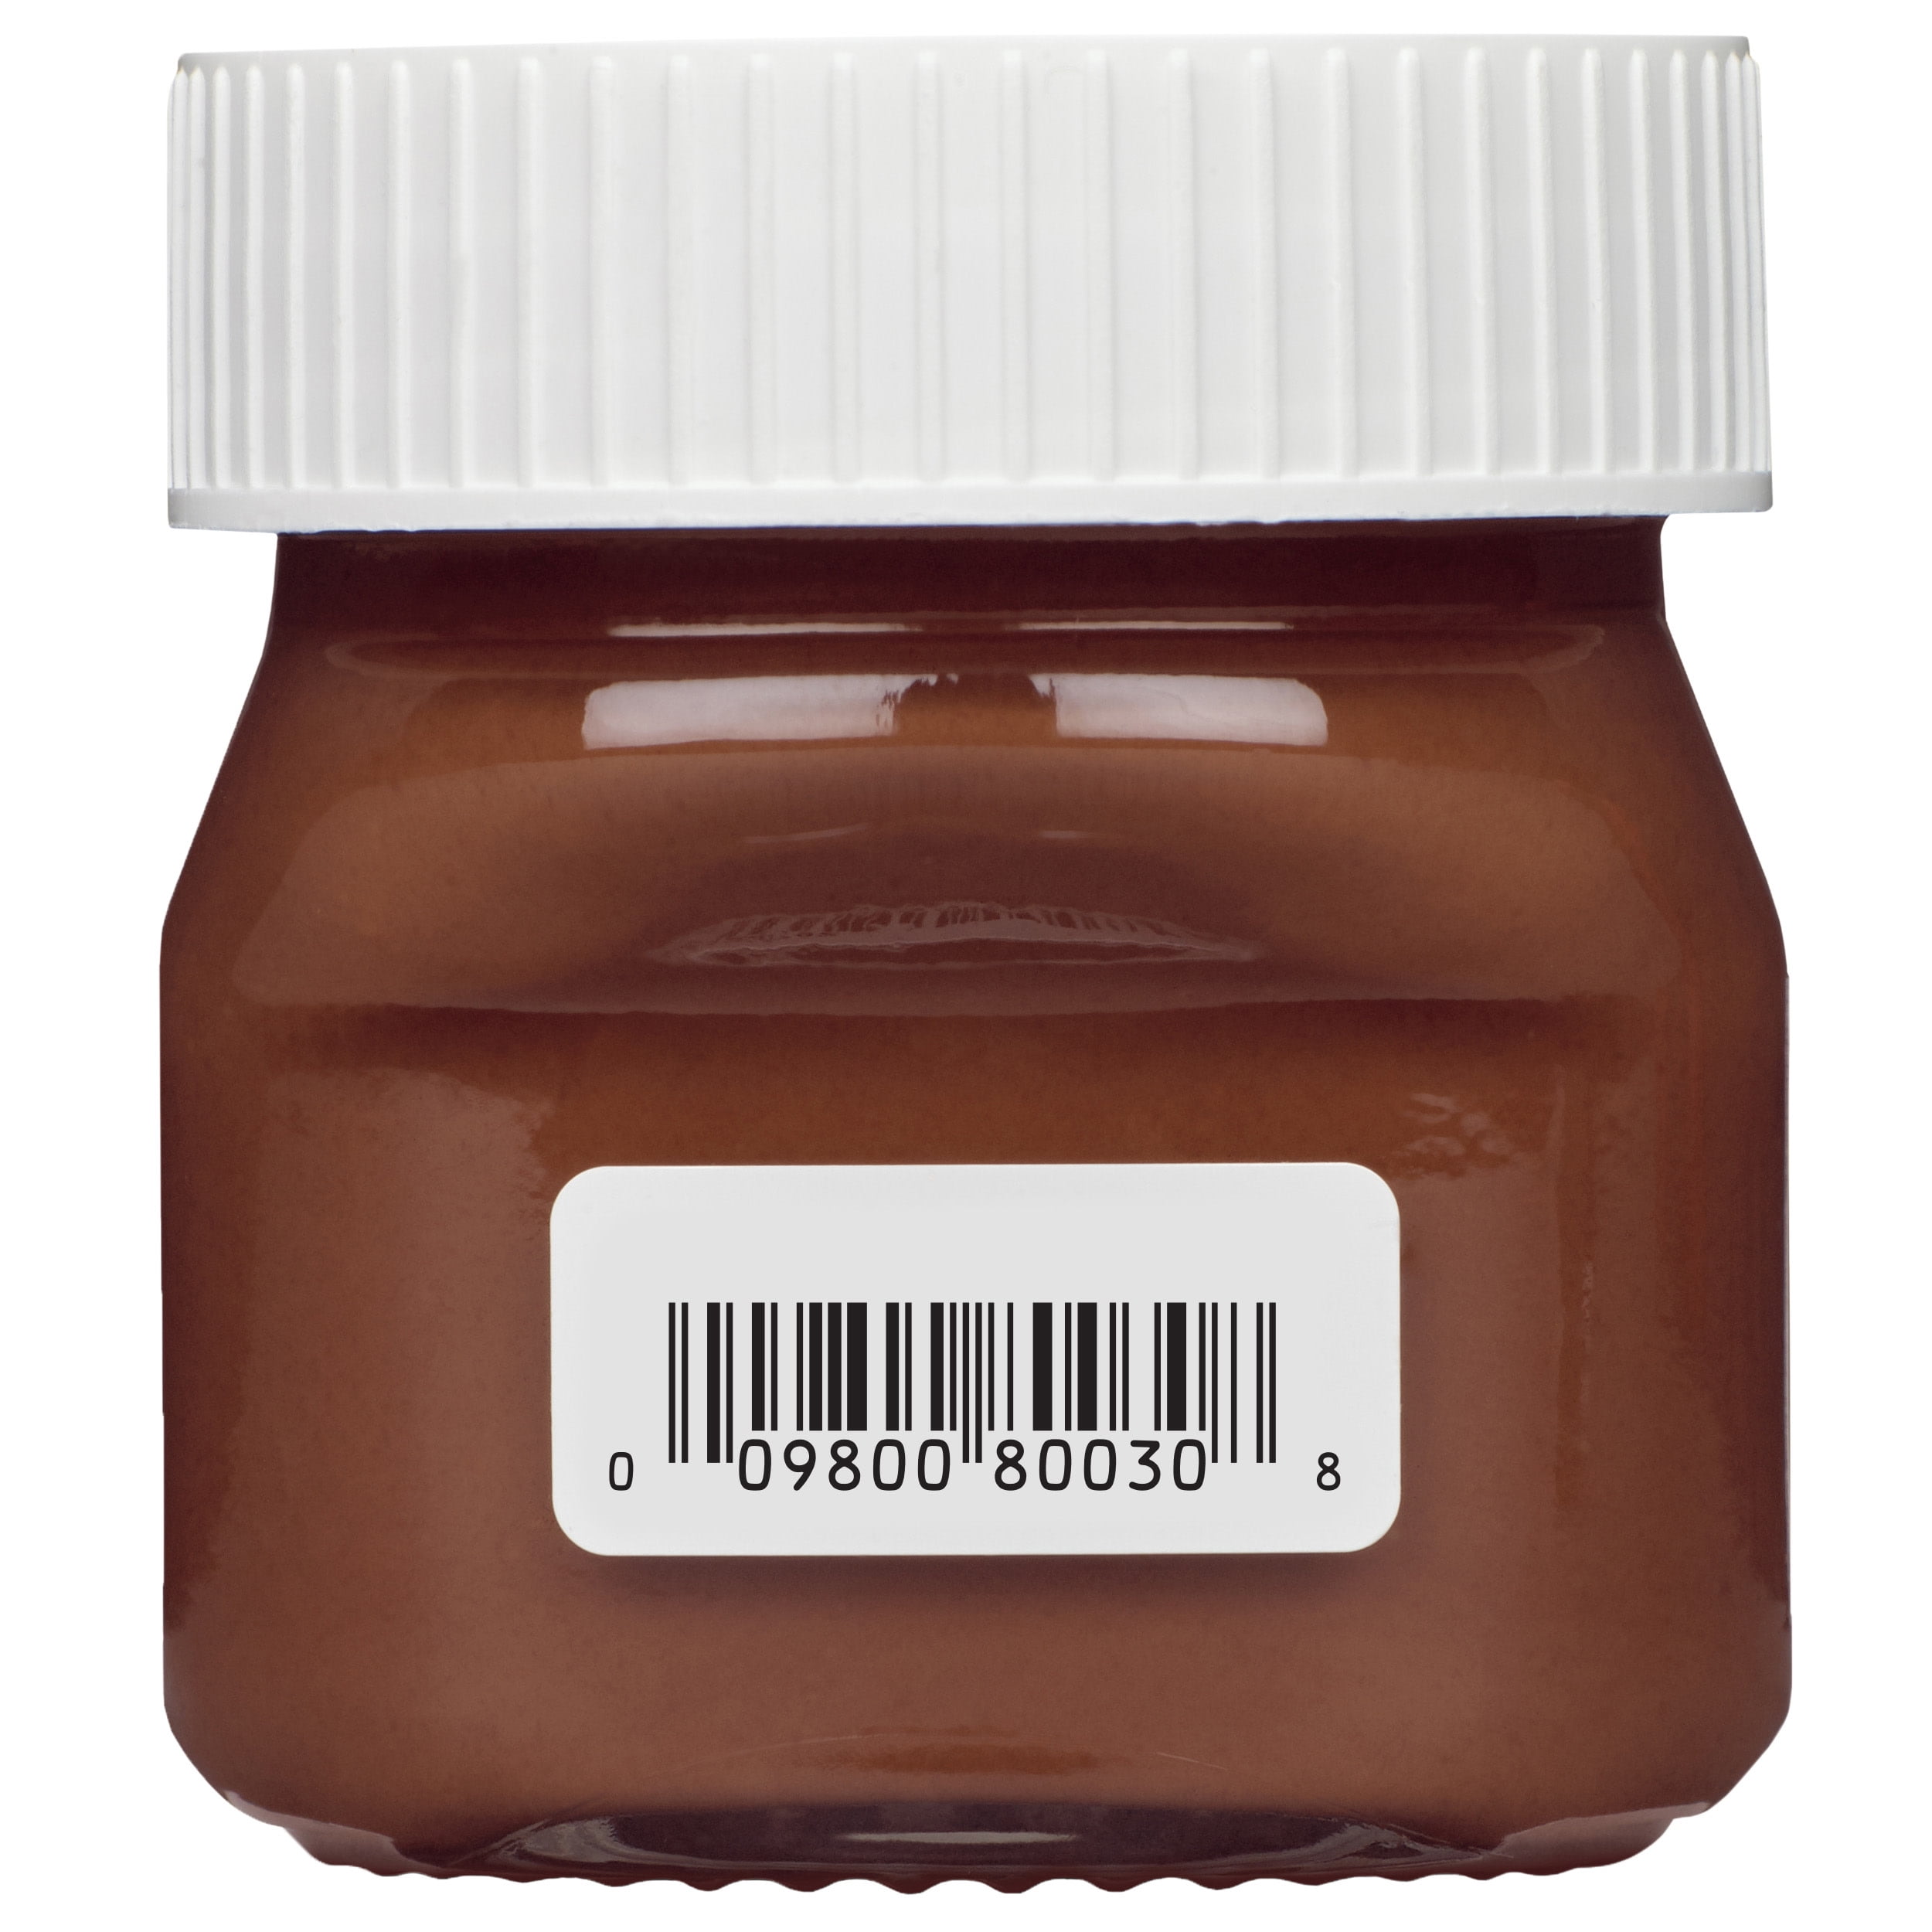 Fill My Stocking with These Mini Nutella Jars From Target